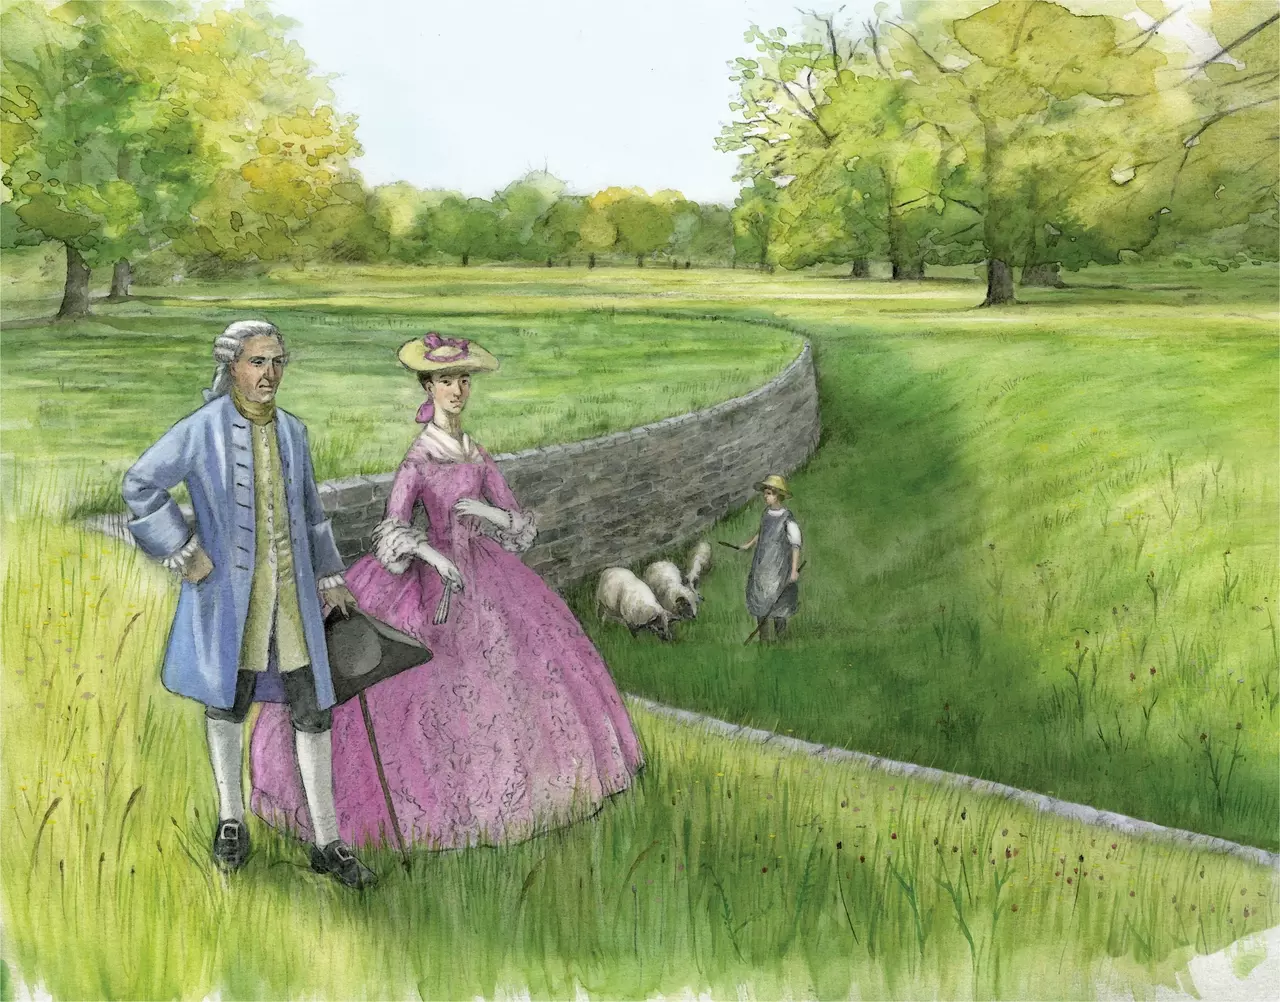 An illustration showing how the ha-ha in Kensington Gardens looked